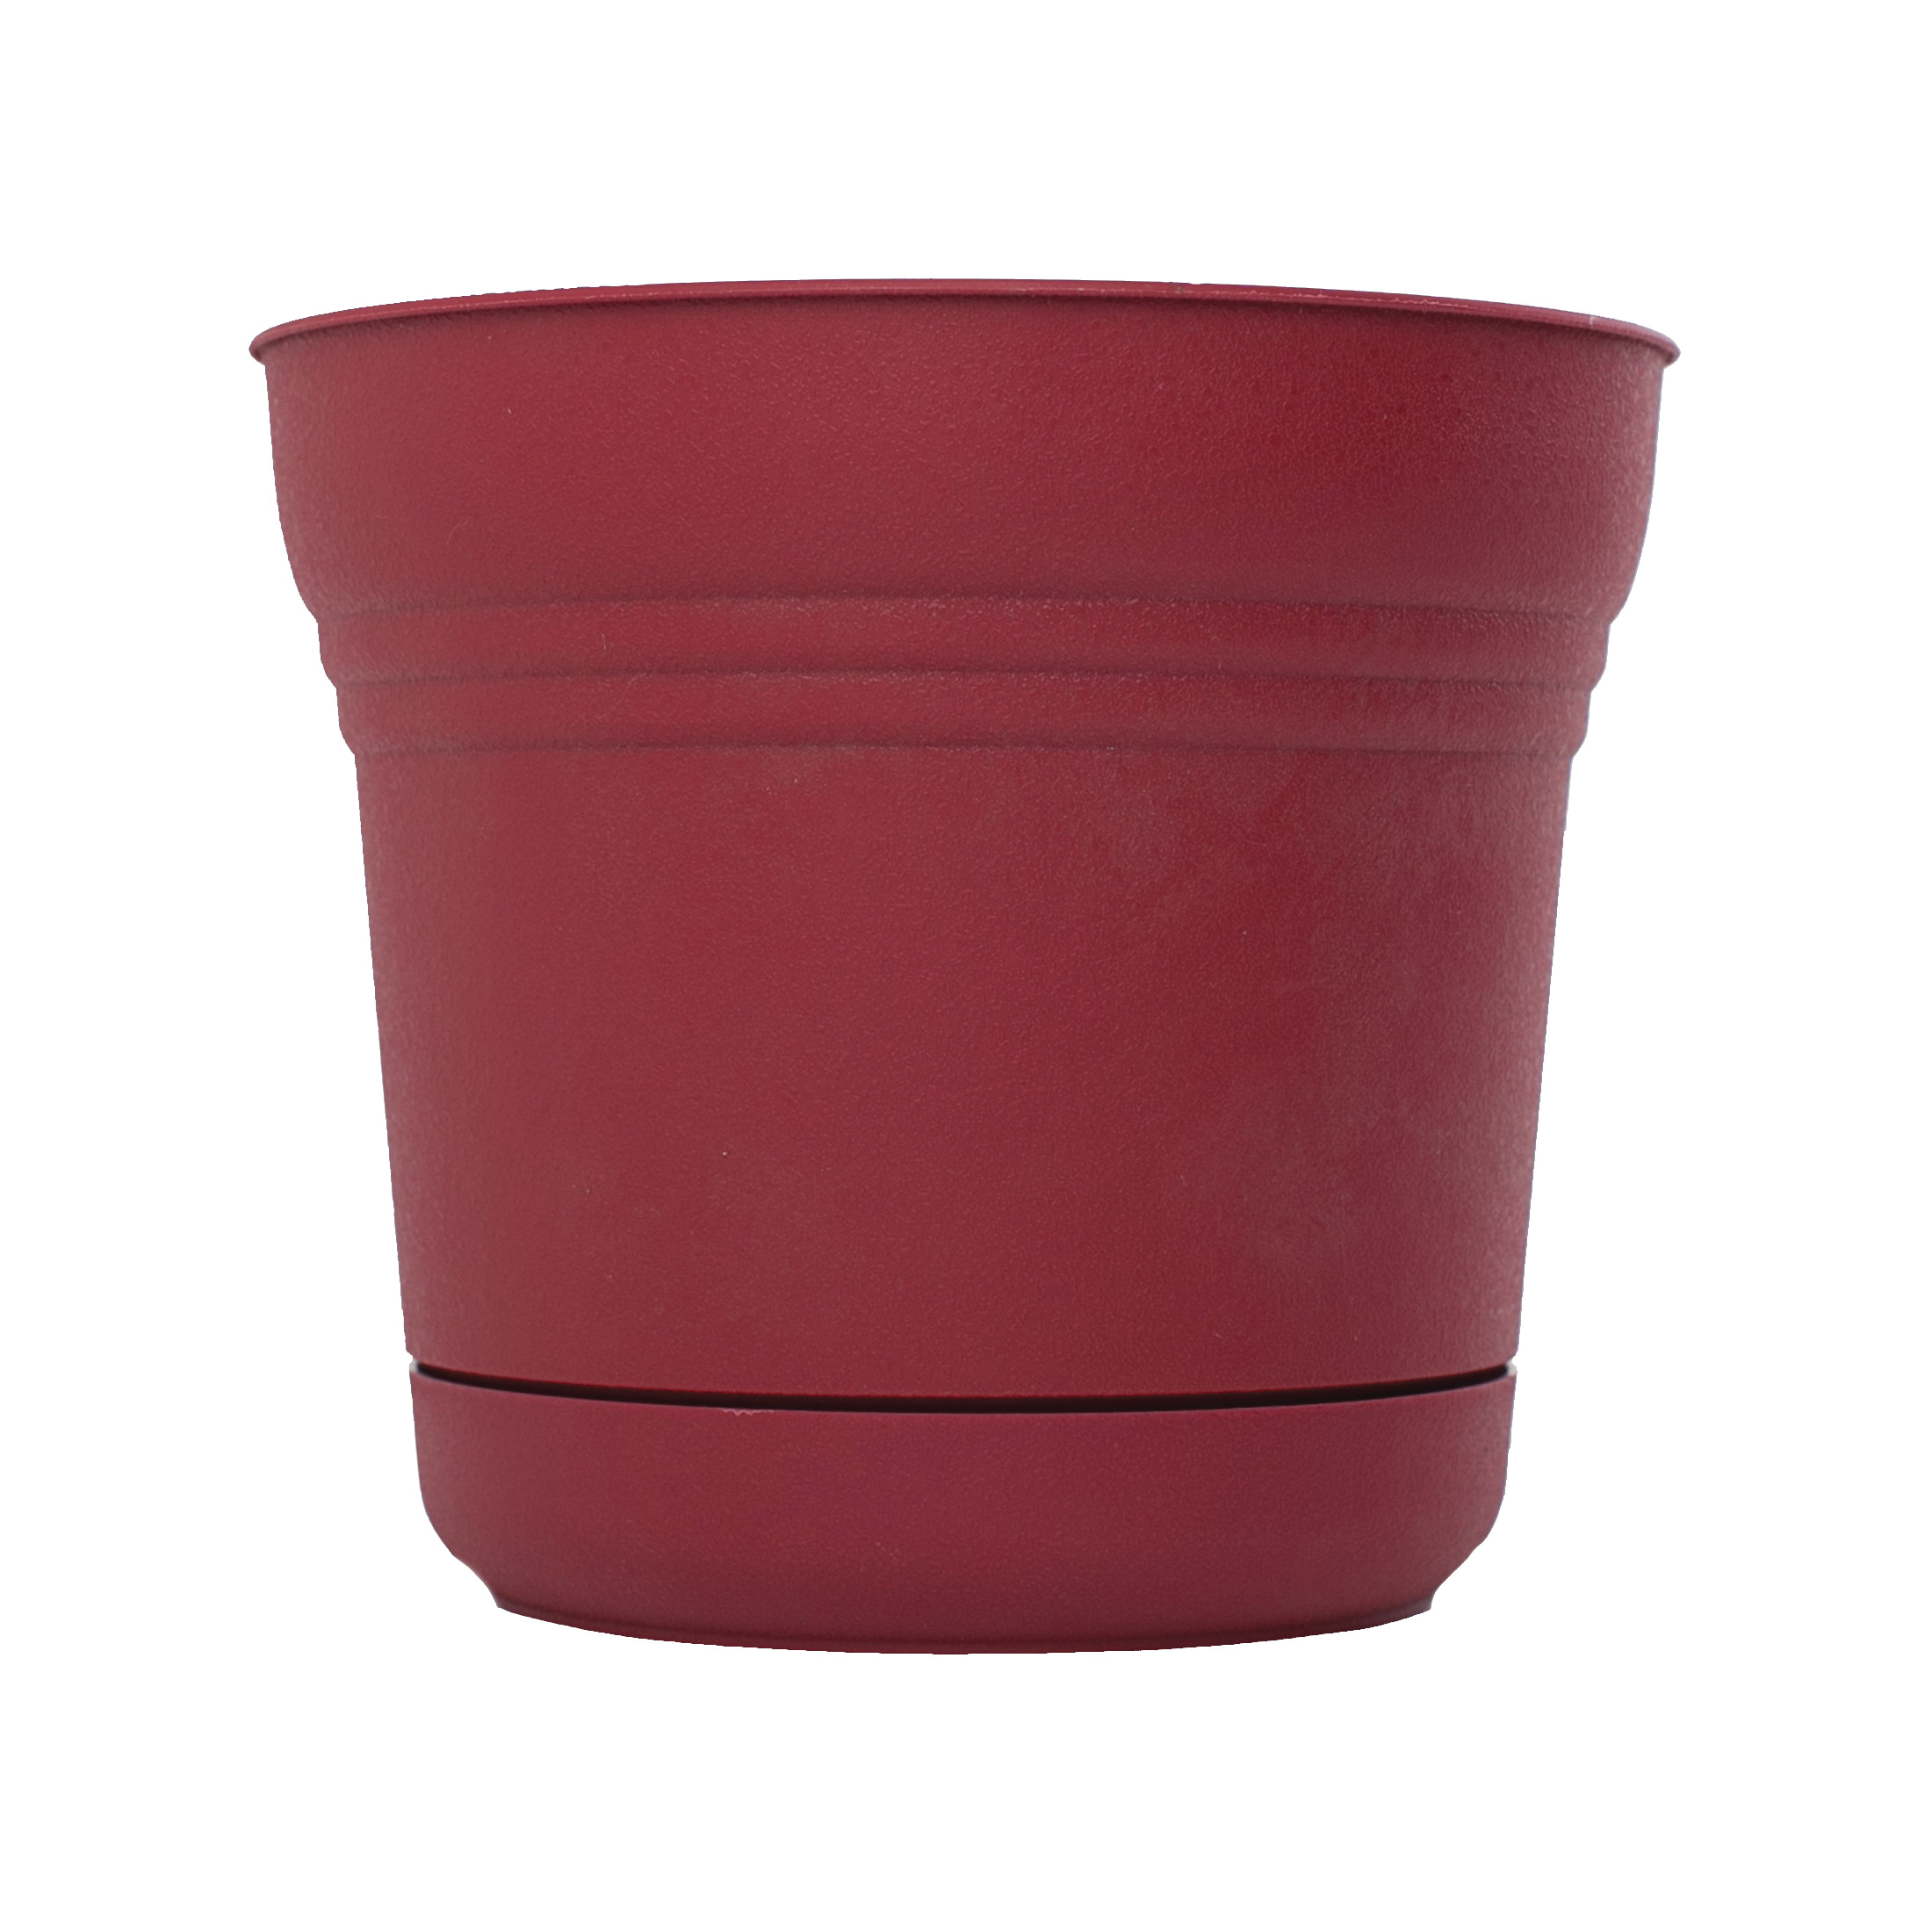 SP1212 Planter, 12.3 in H, 10.8 in W, Polypropylene, Union Red